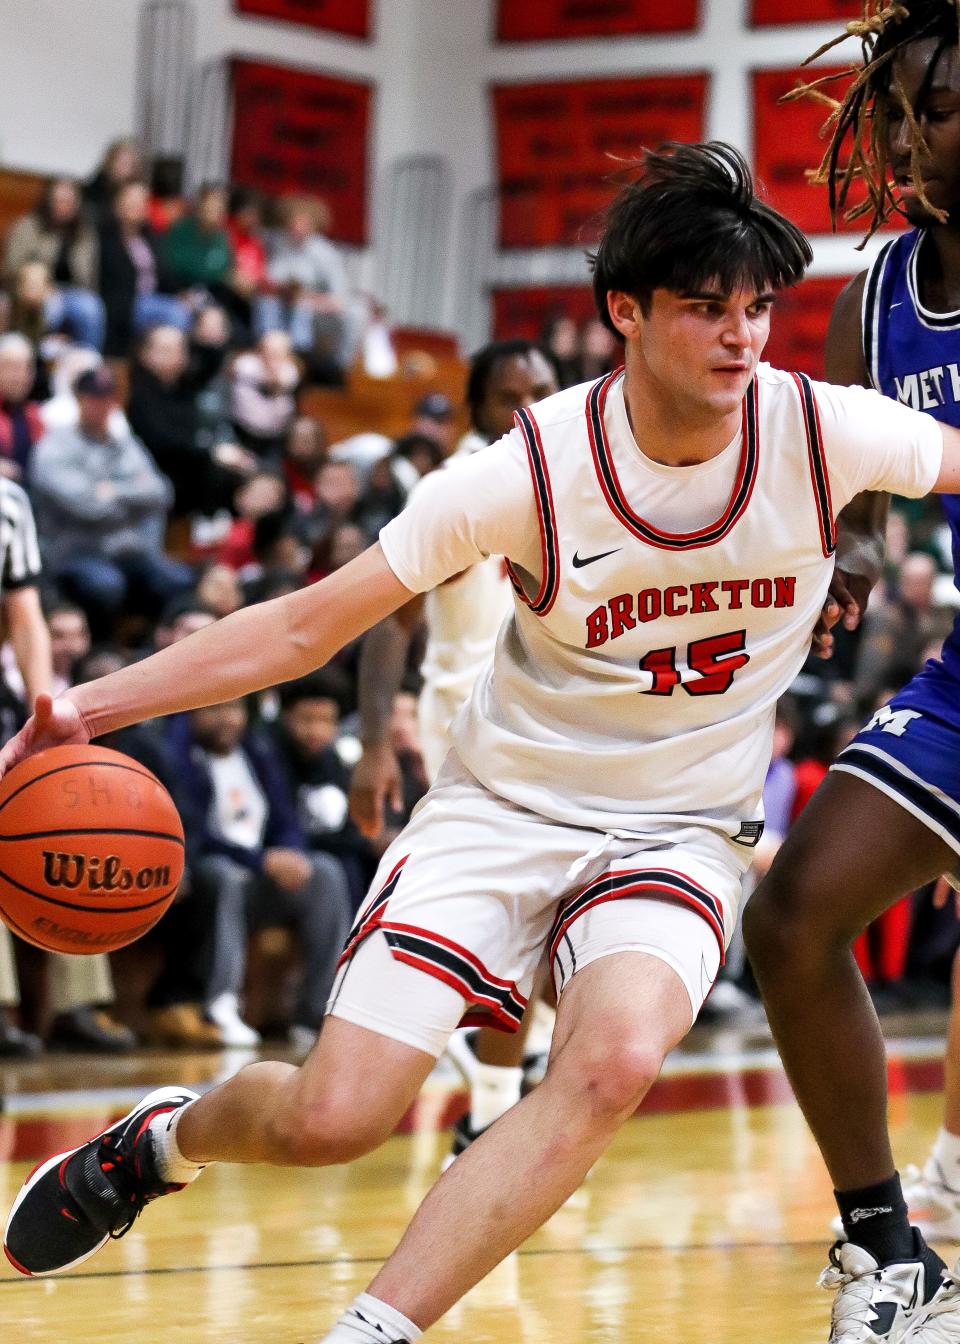 Brockton's Dominick Hopkins drives to the basket during a game against Methuen in the Round of 32 of the Div. 1 state tournament on Thursday, March 2, 2023.